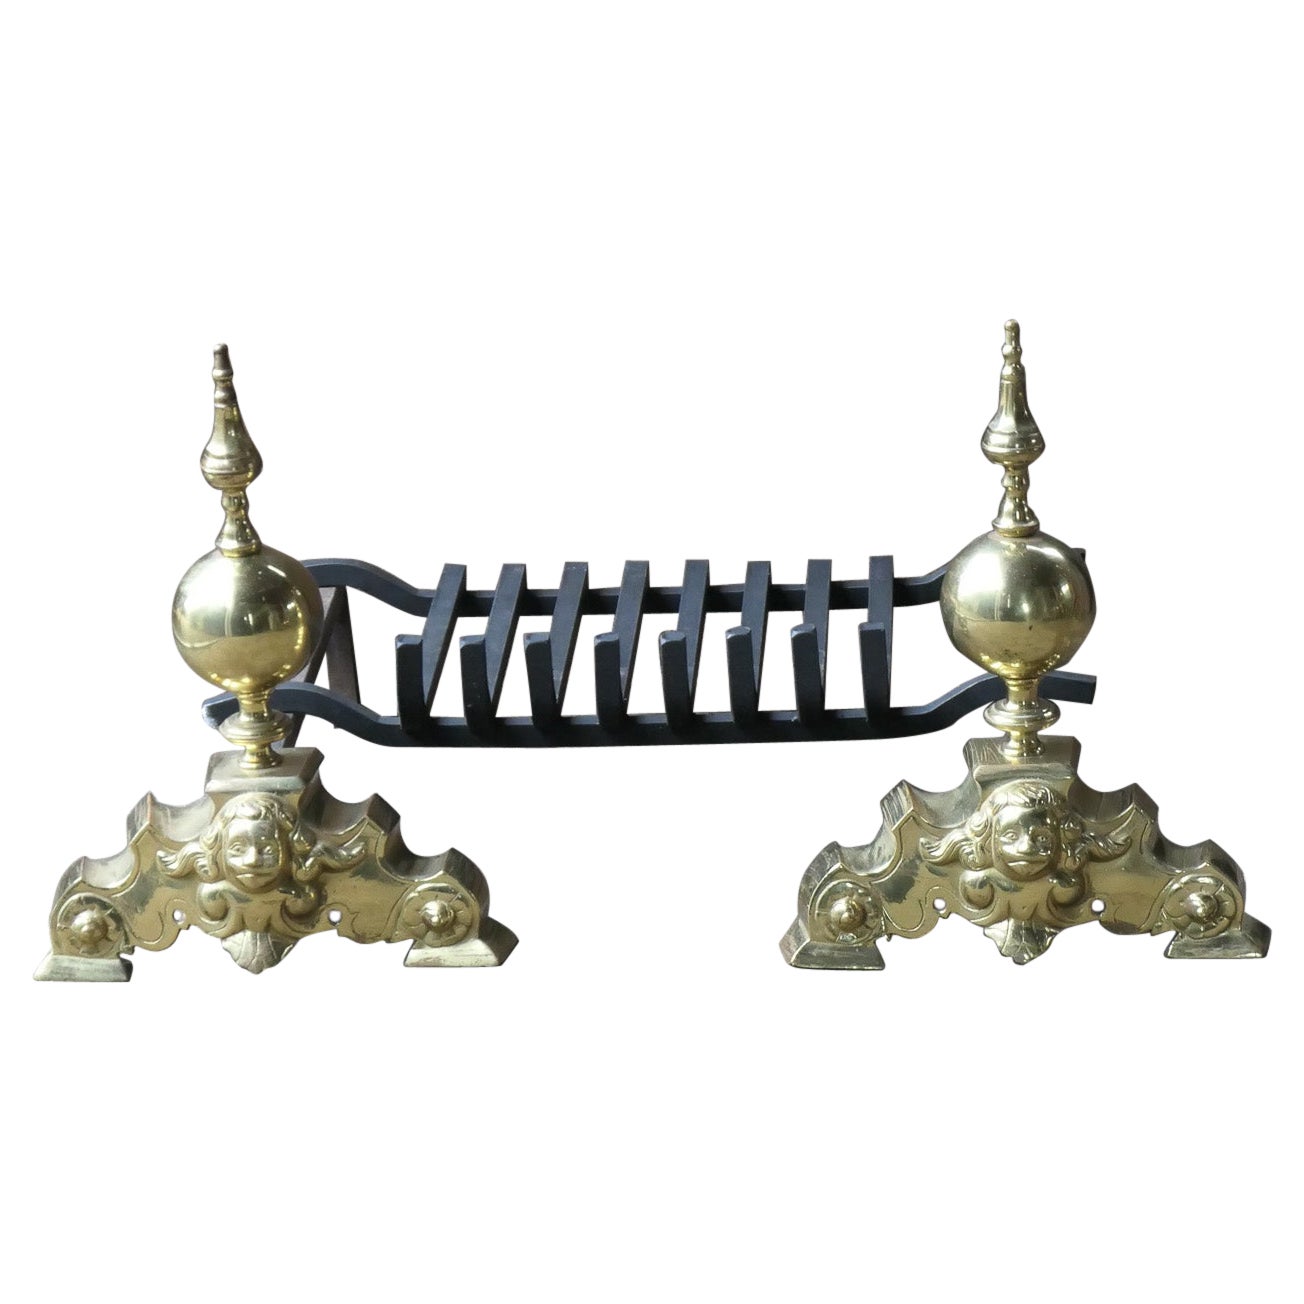 French Louis XIV Style Fire Grate, Fireplace Grate